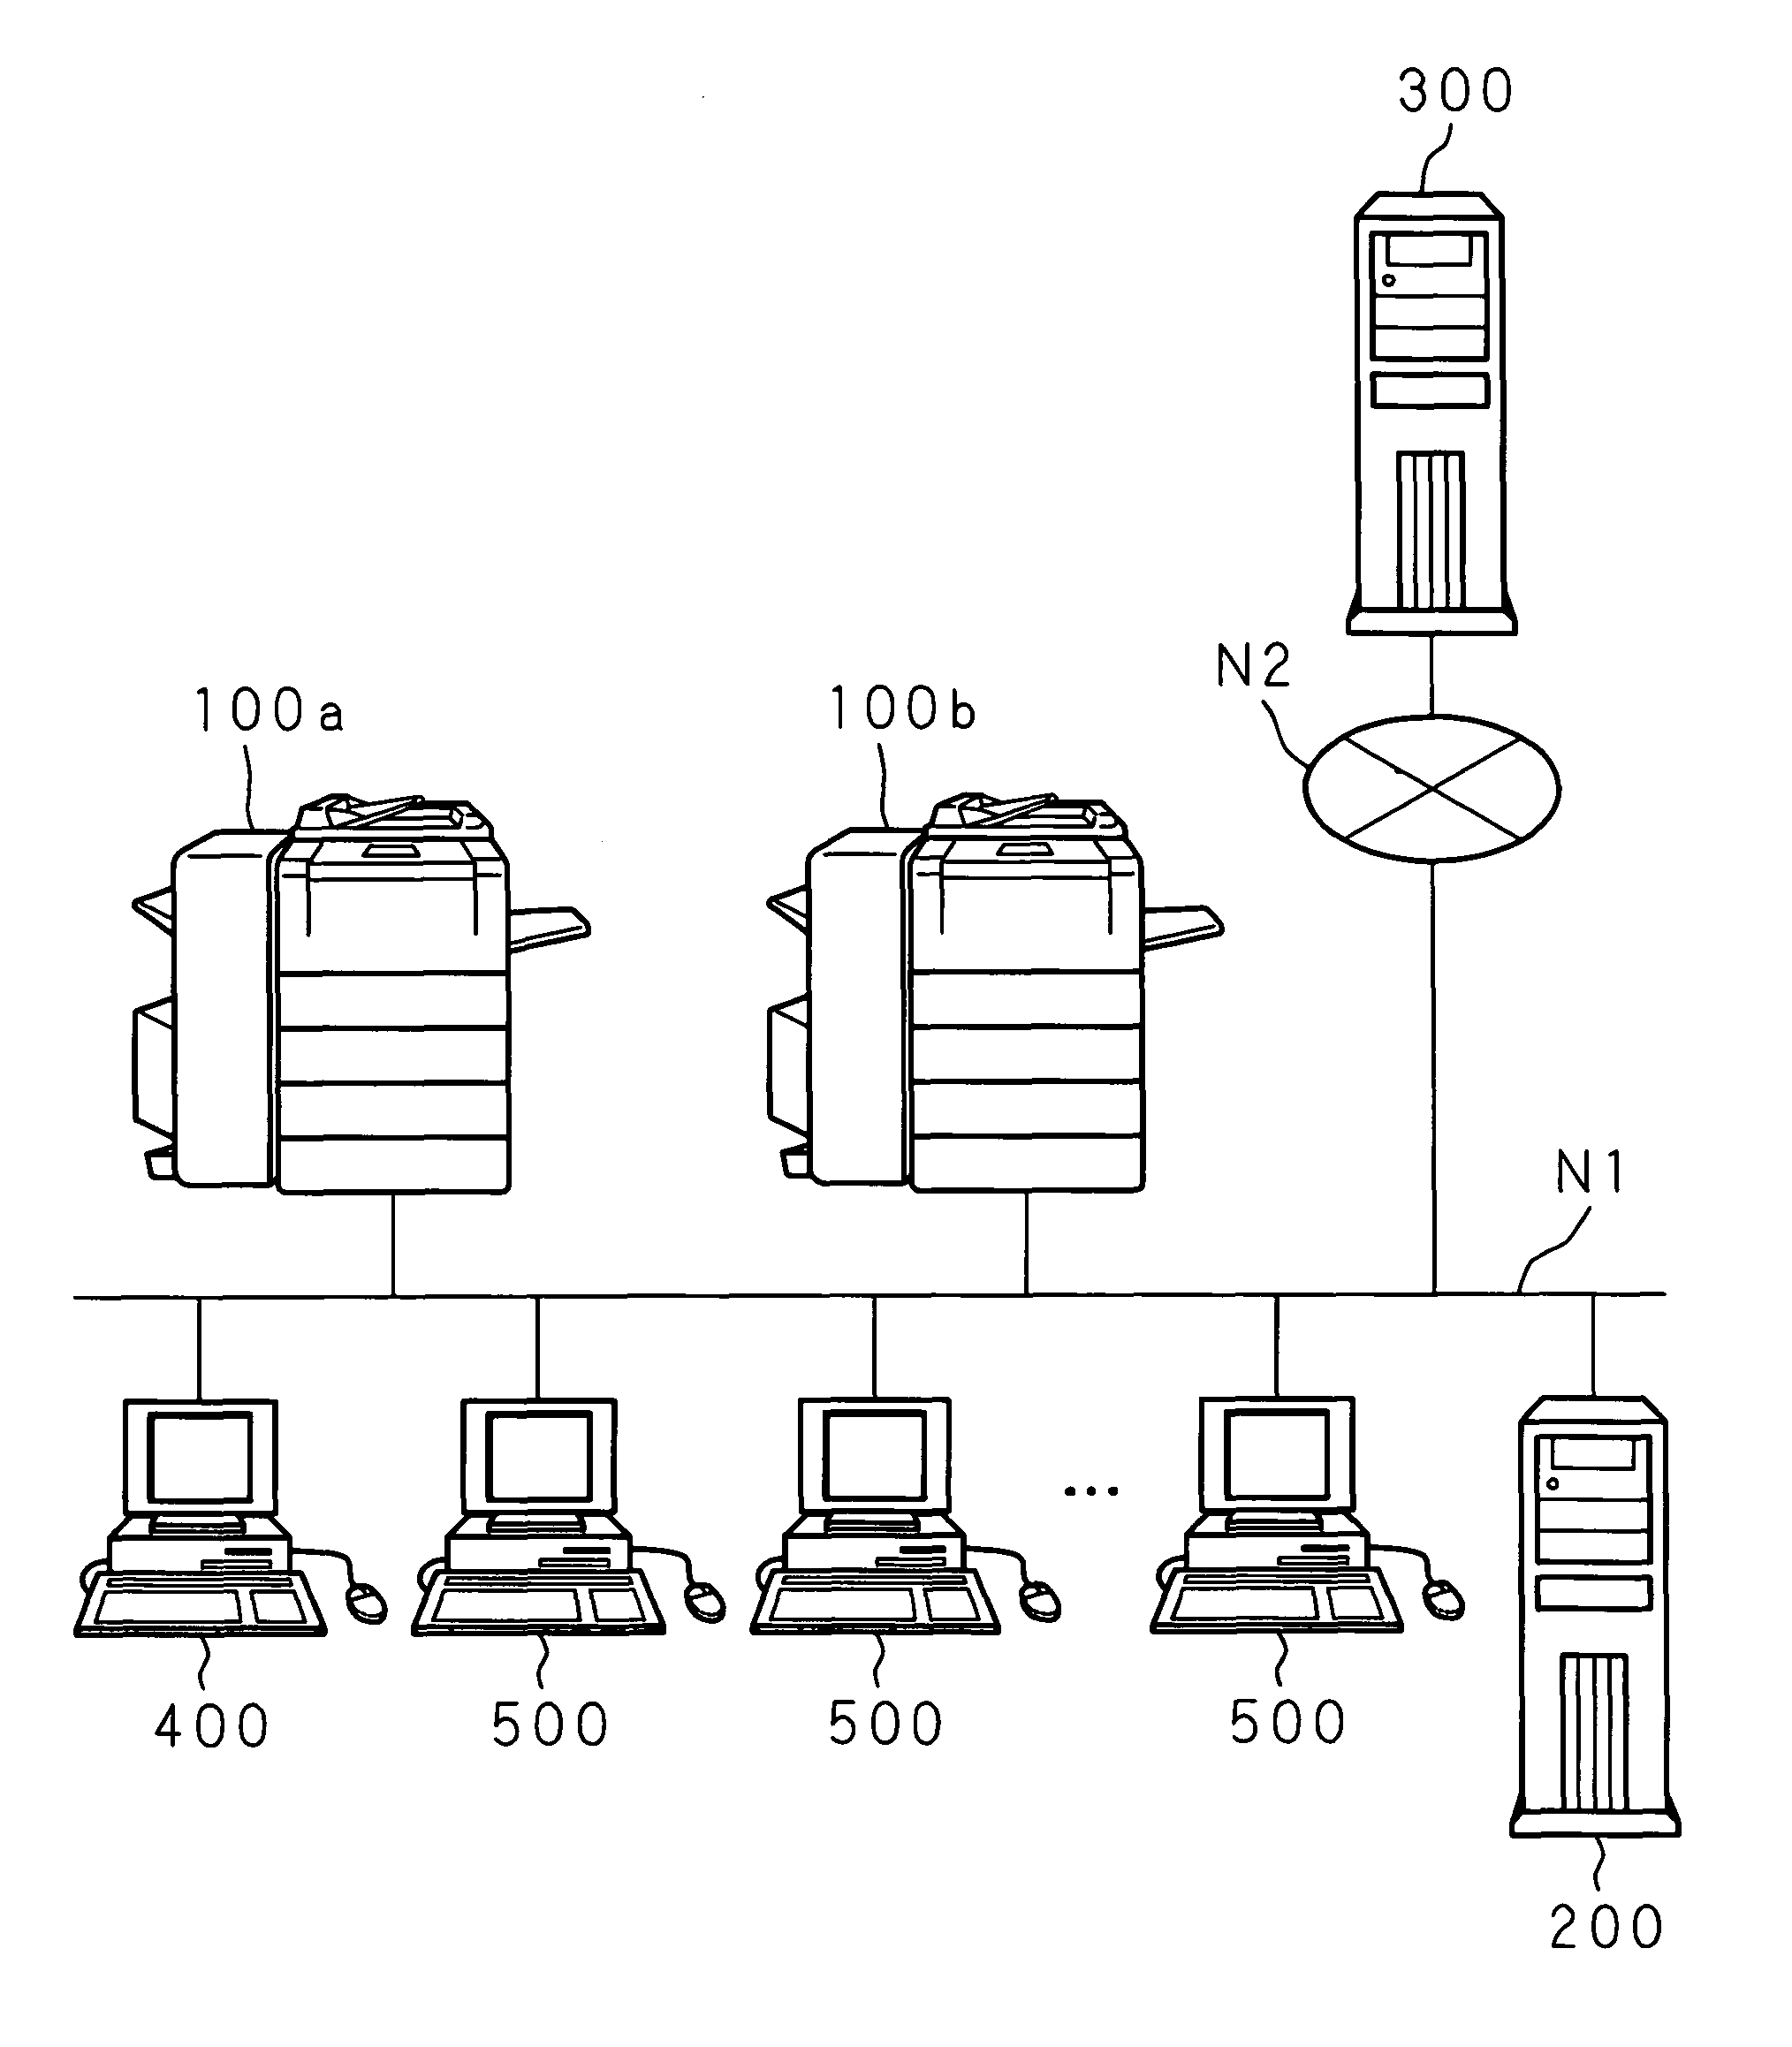 Image forming system with user authentication correlating user to department for accounting purposes